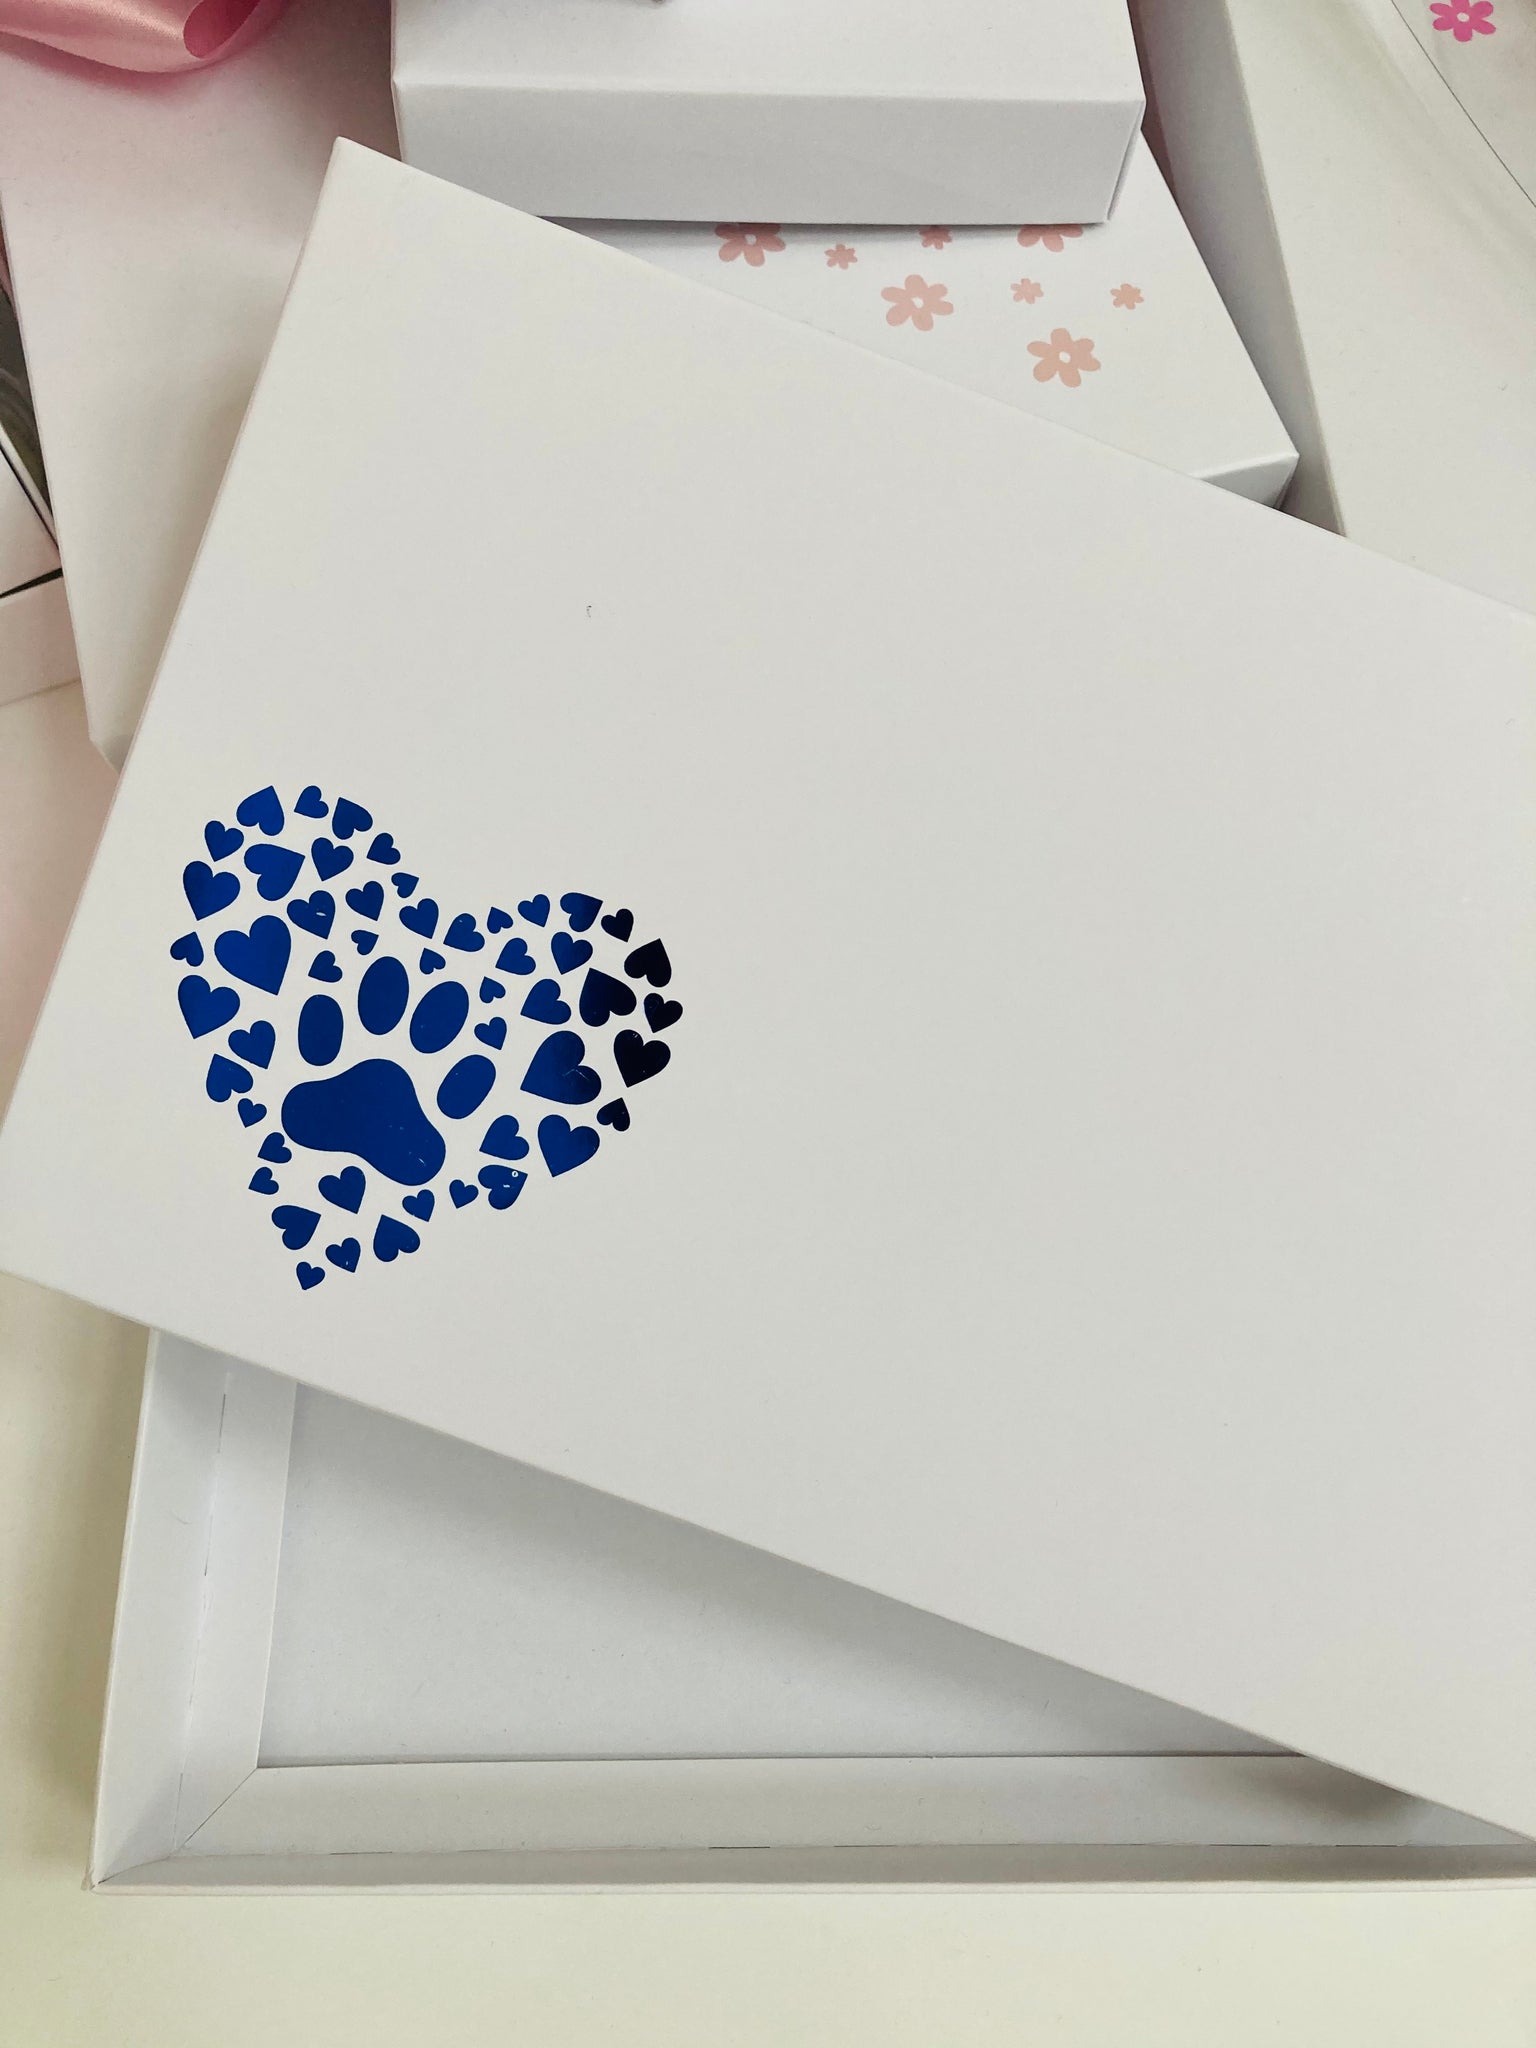 BLUE PAW PRINT HEART SOLID WHITE LID GIFT BOX BLANK 240x155x30mm